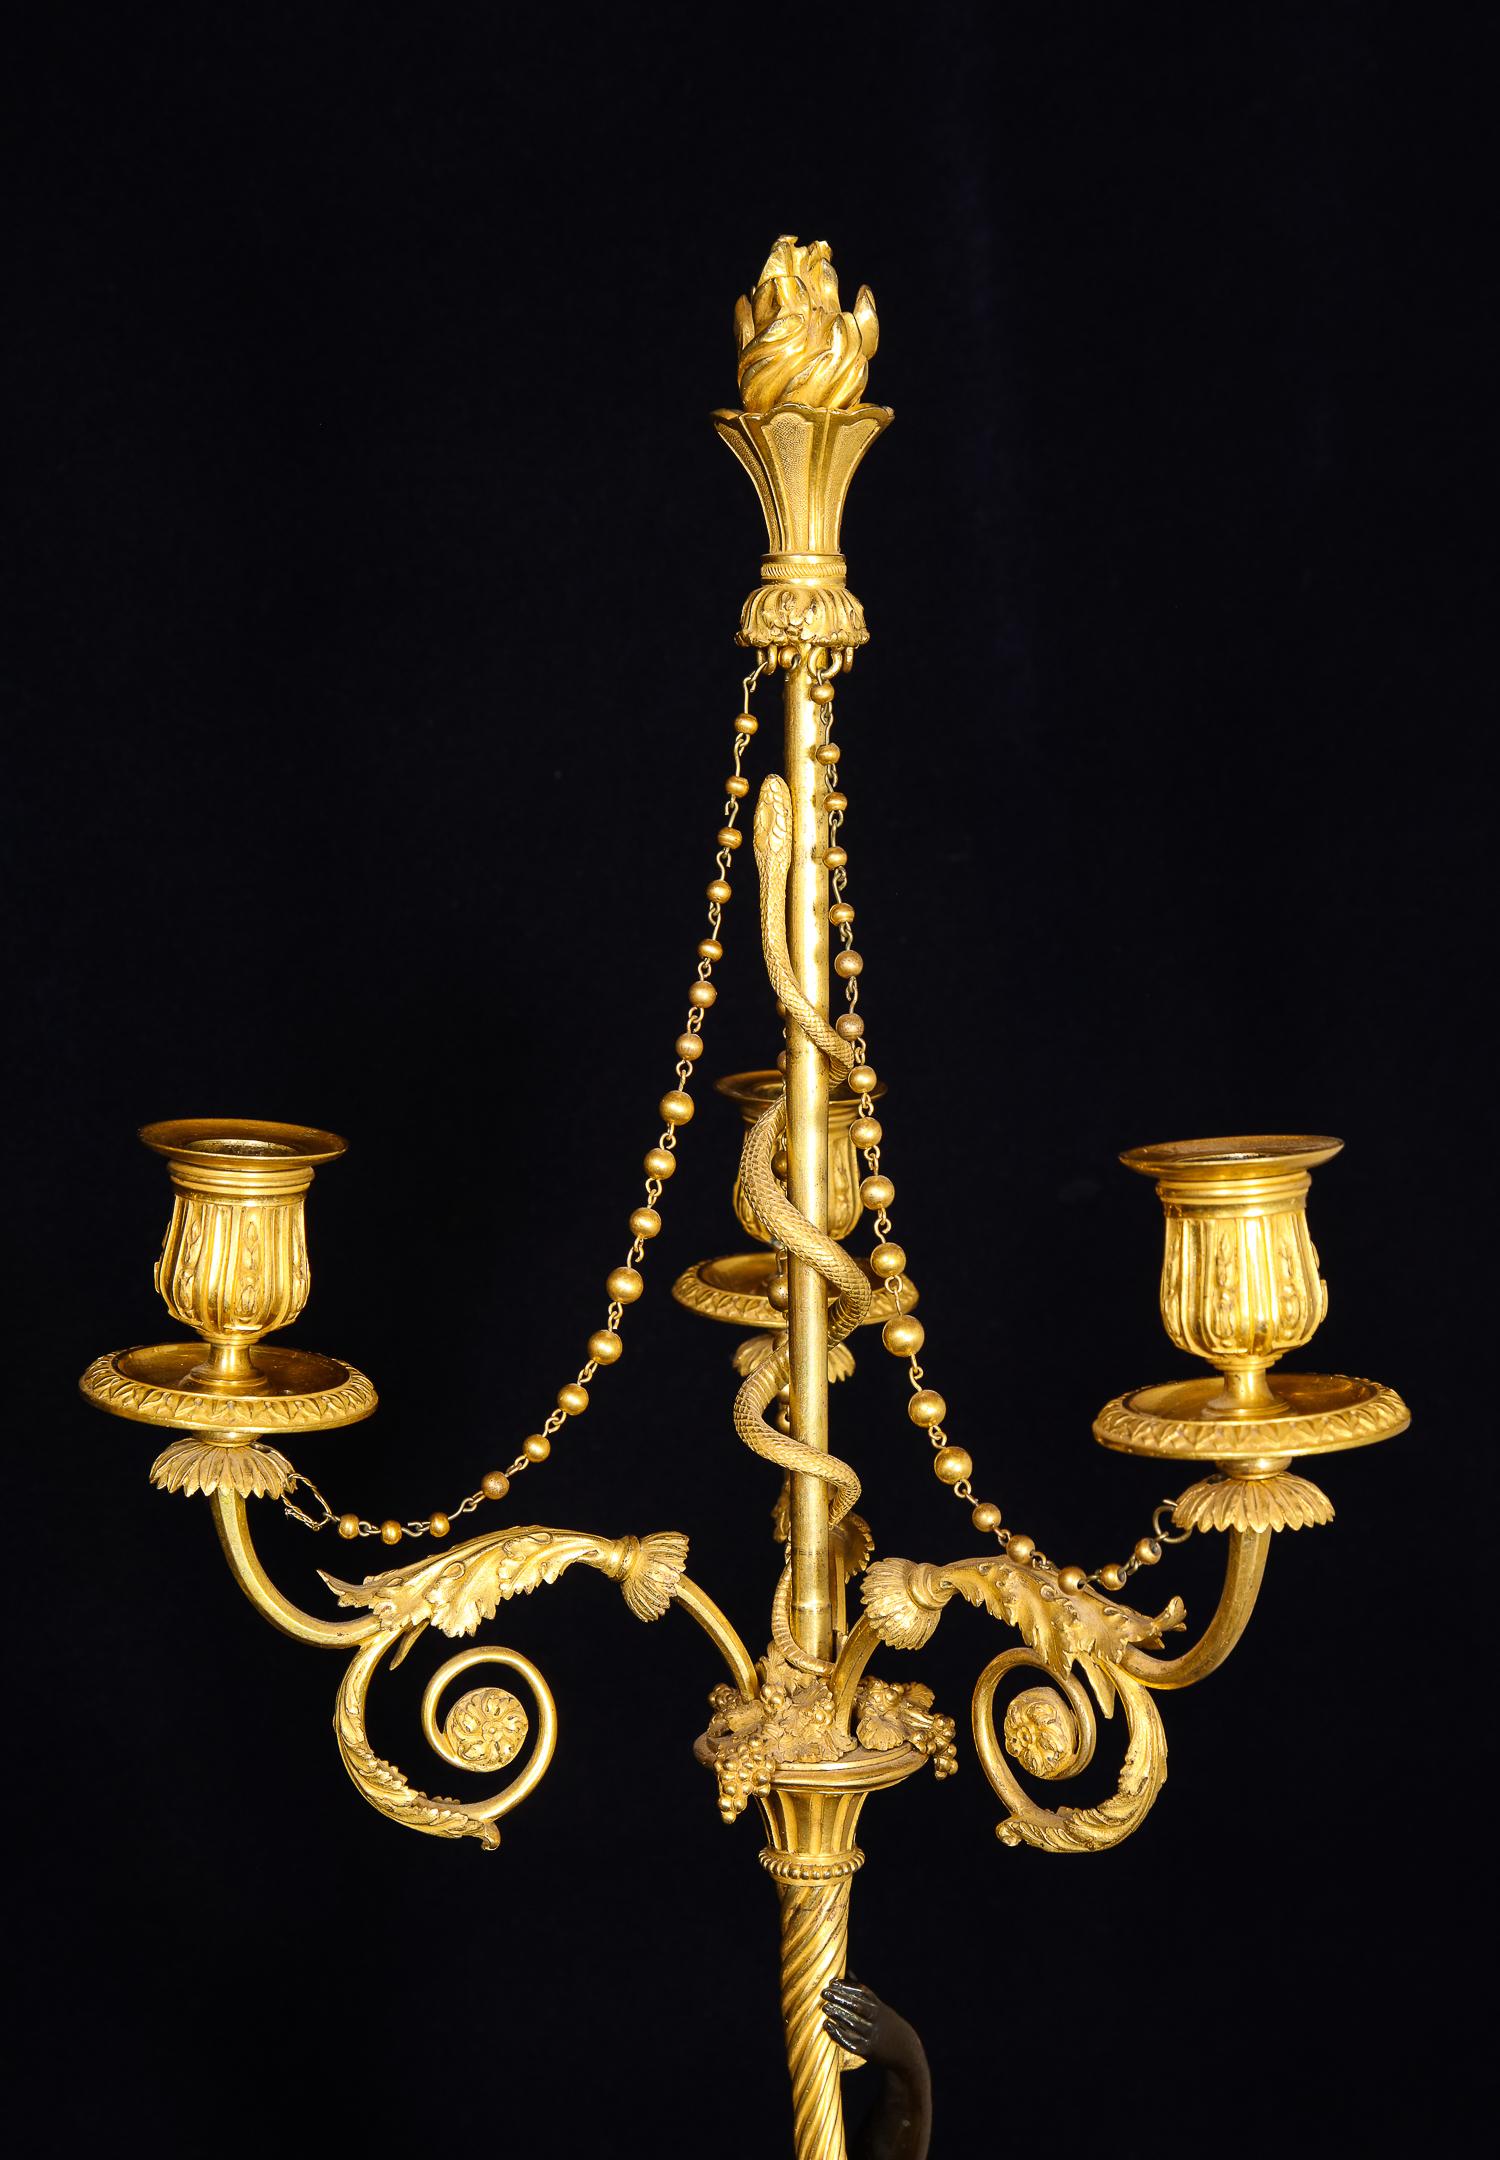 Pair of Large Antique French Louis XVI Figural Gilt Bronze & Marble Candelabras 1